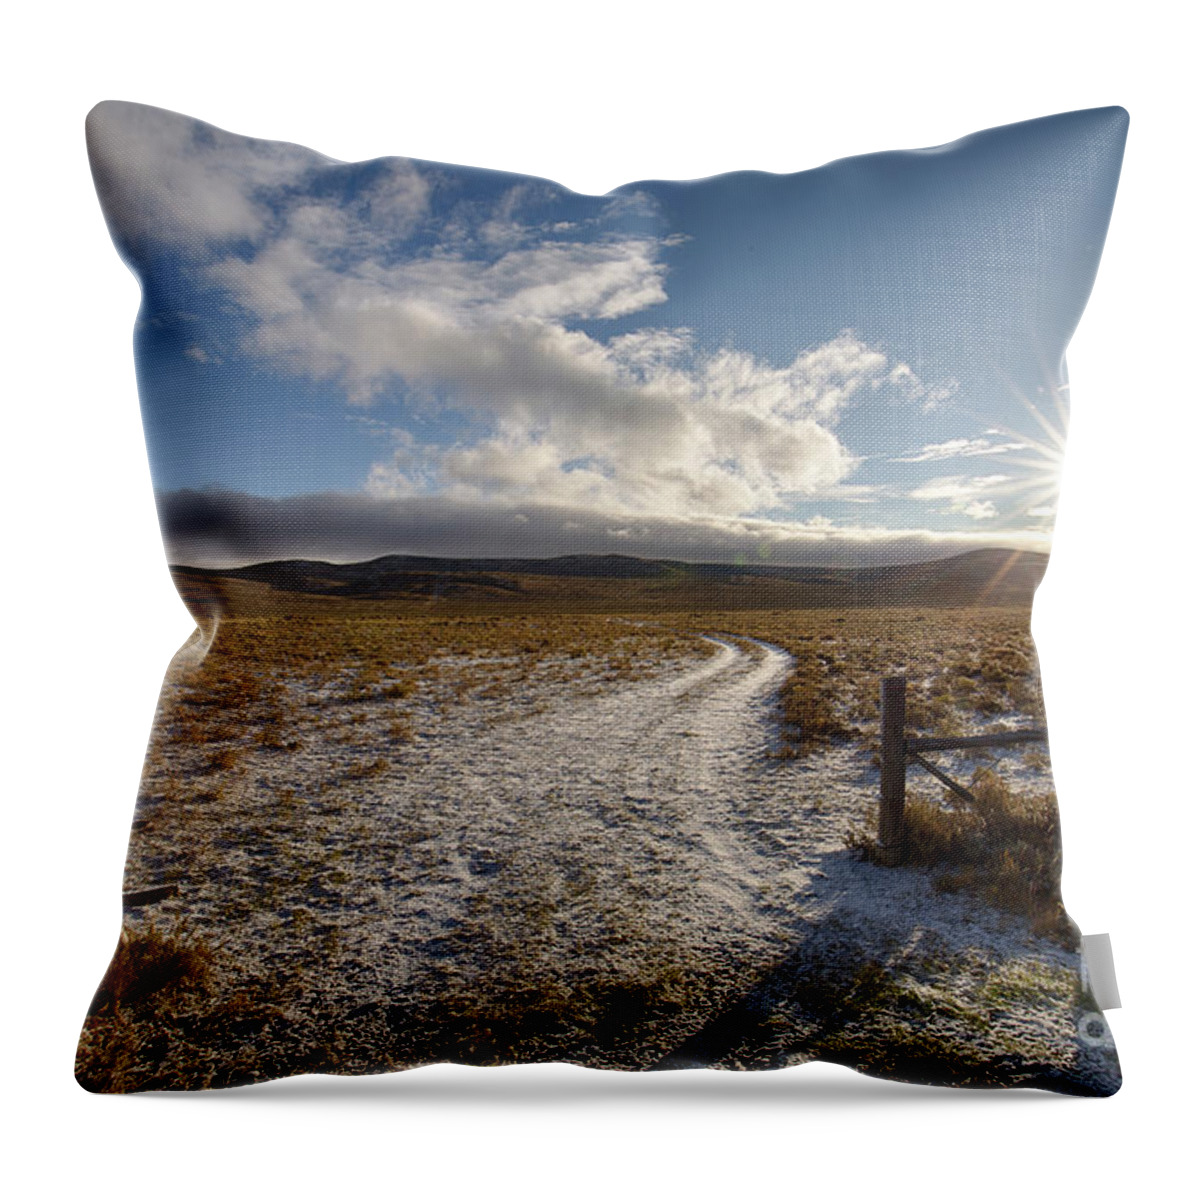 Birch Creek Valley Throw Pillow featuring the photograph Birch Creek Valley Sun by Idaho Scenic Images Linda Lantzy